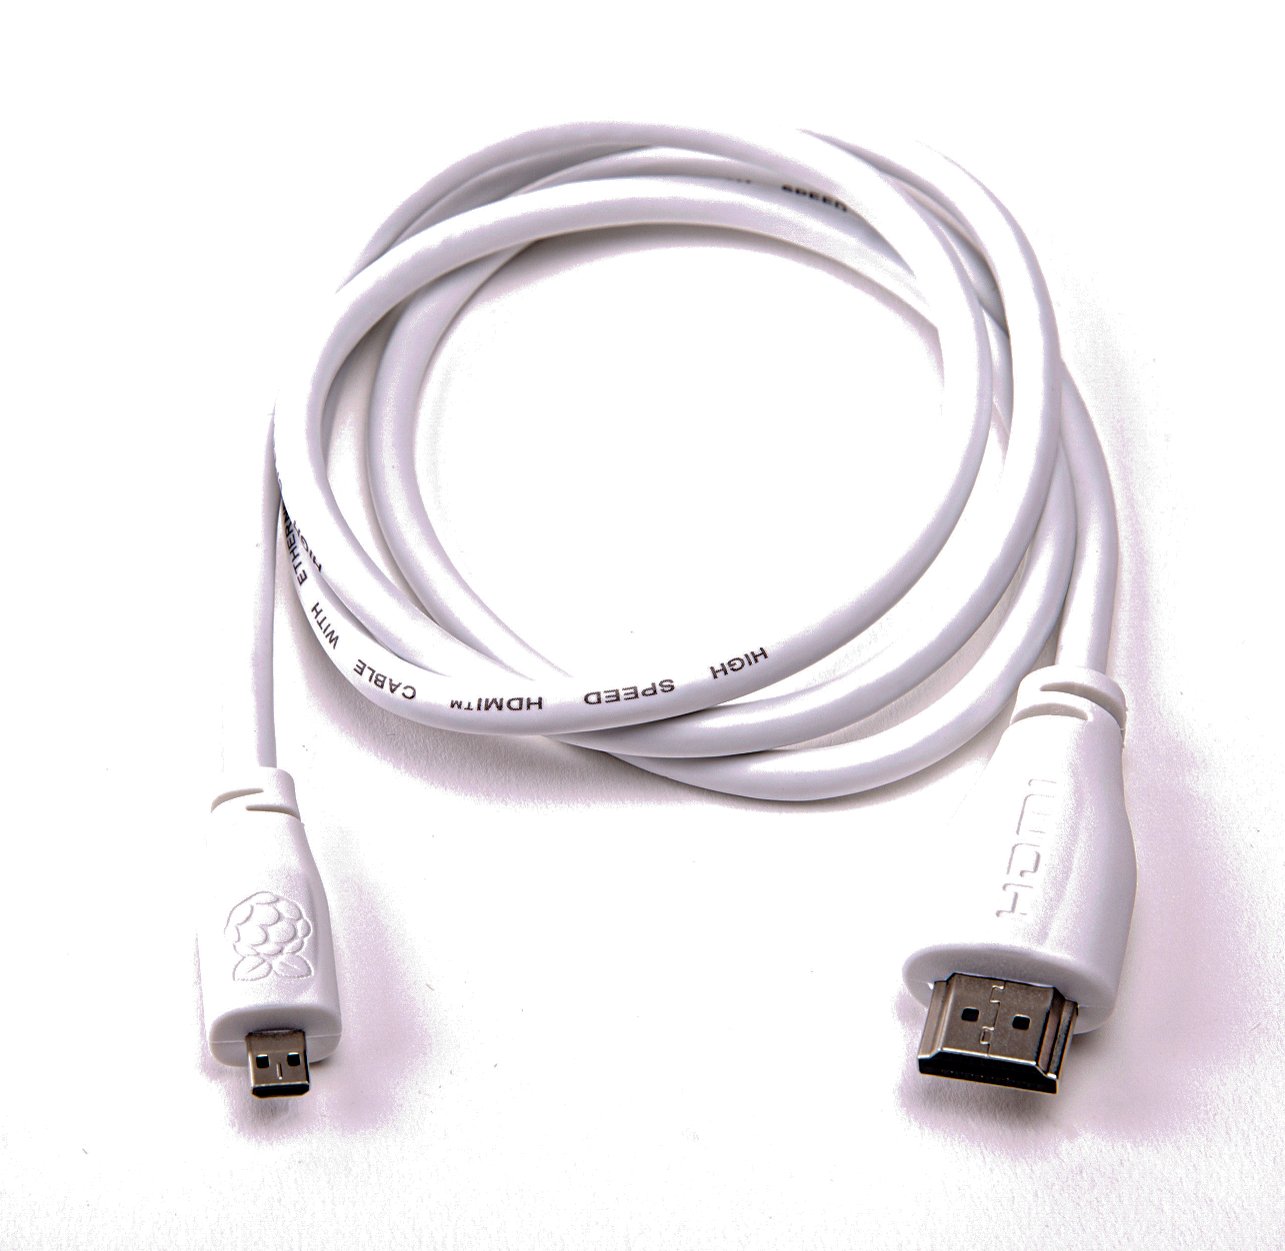 Buy HDMI CABLE - FOR PI4 - MICRO TO HDMI (Chinese) Online in India